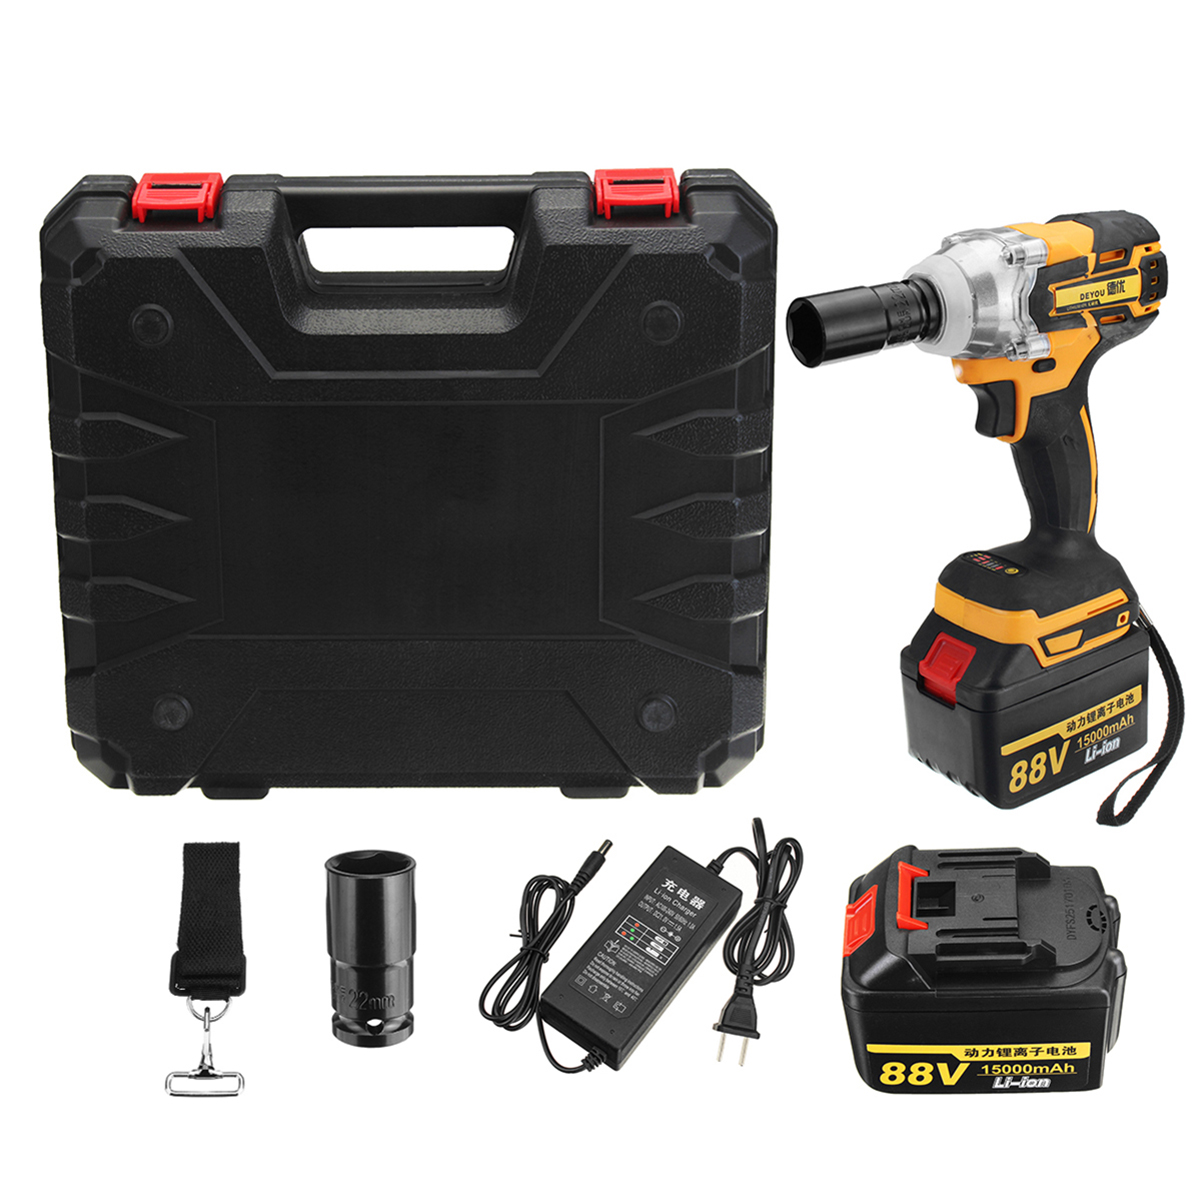 88V-15000mAh-Electric-Wrench-2-Batteries-1-Charger-Brushless-Cordless-Drive-Impact-Wrench-Tools-1282967-7